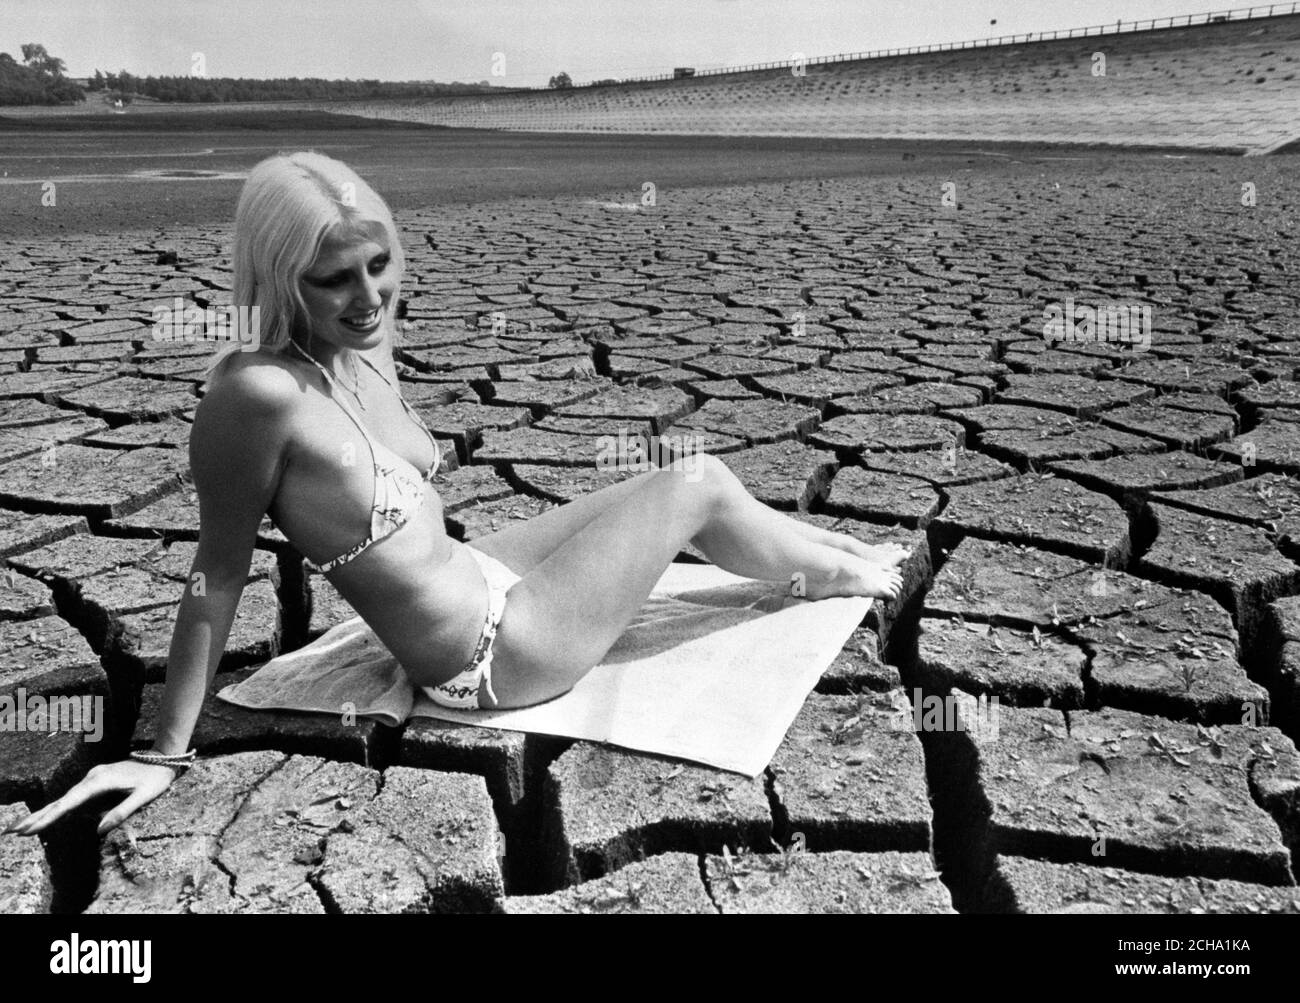 Tanning herself in the drought that has brought water supply problems to Britain is 19-year-old model Cerica. She donned a bikini and enjoyed the sunshine in the dried-up basin of Pitsford Reservoir in Northamptonshire. Stock Photo